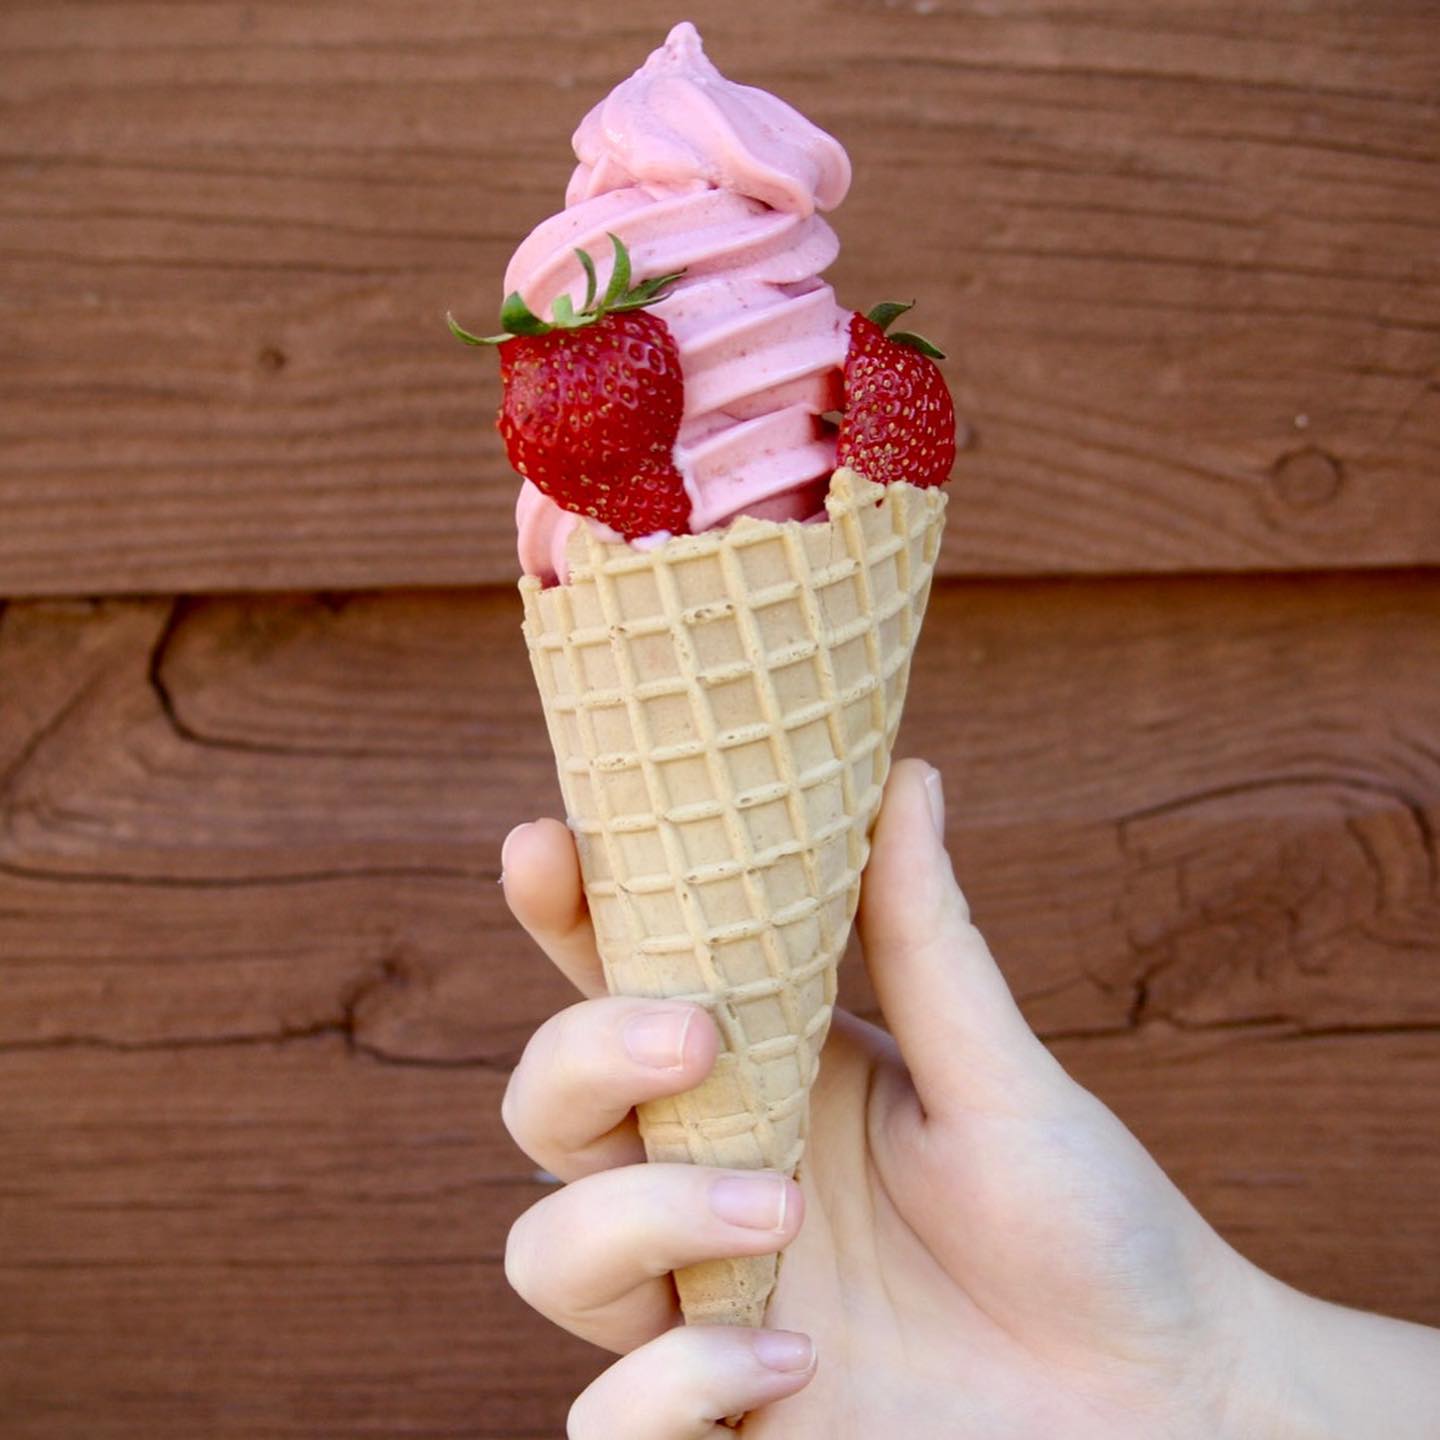 Strawberry ice cream cone with sliced strawberries incorporated, a market treat in Watsonia